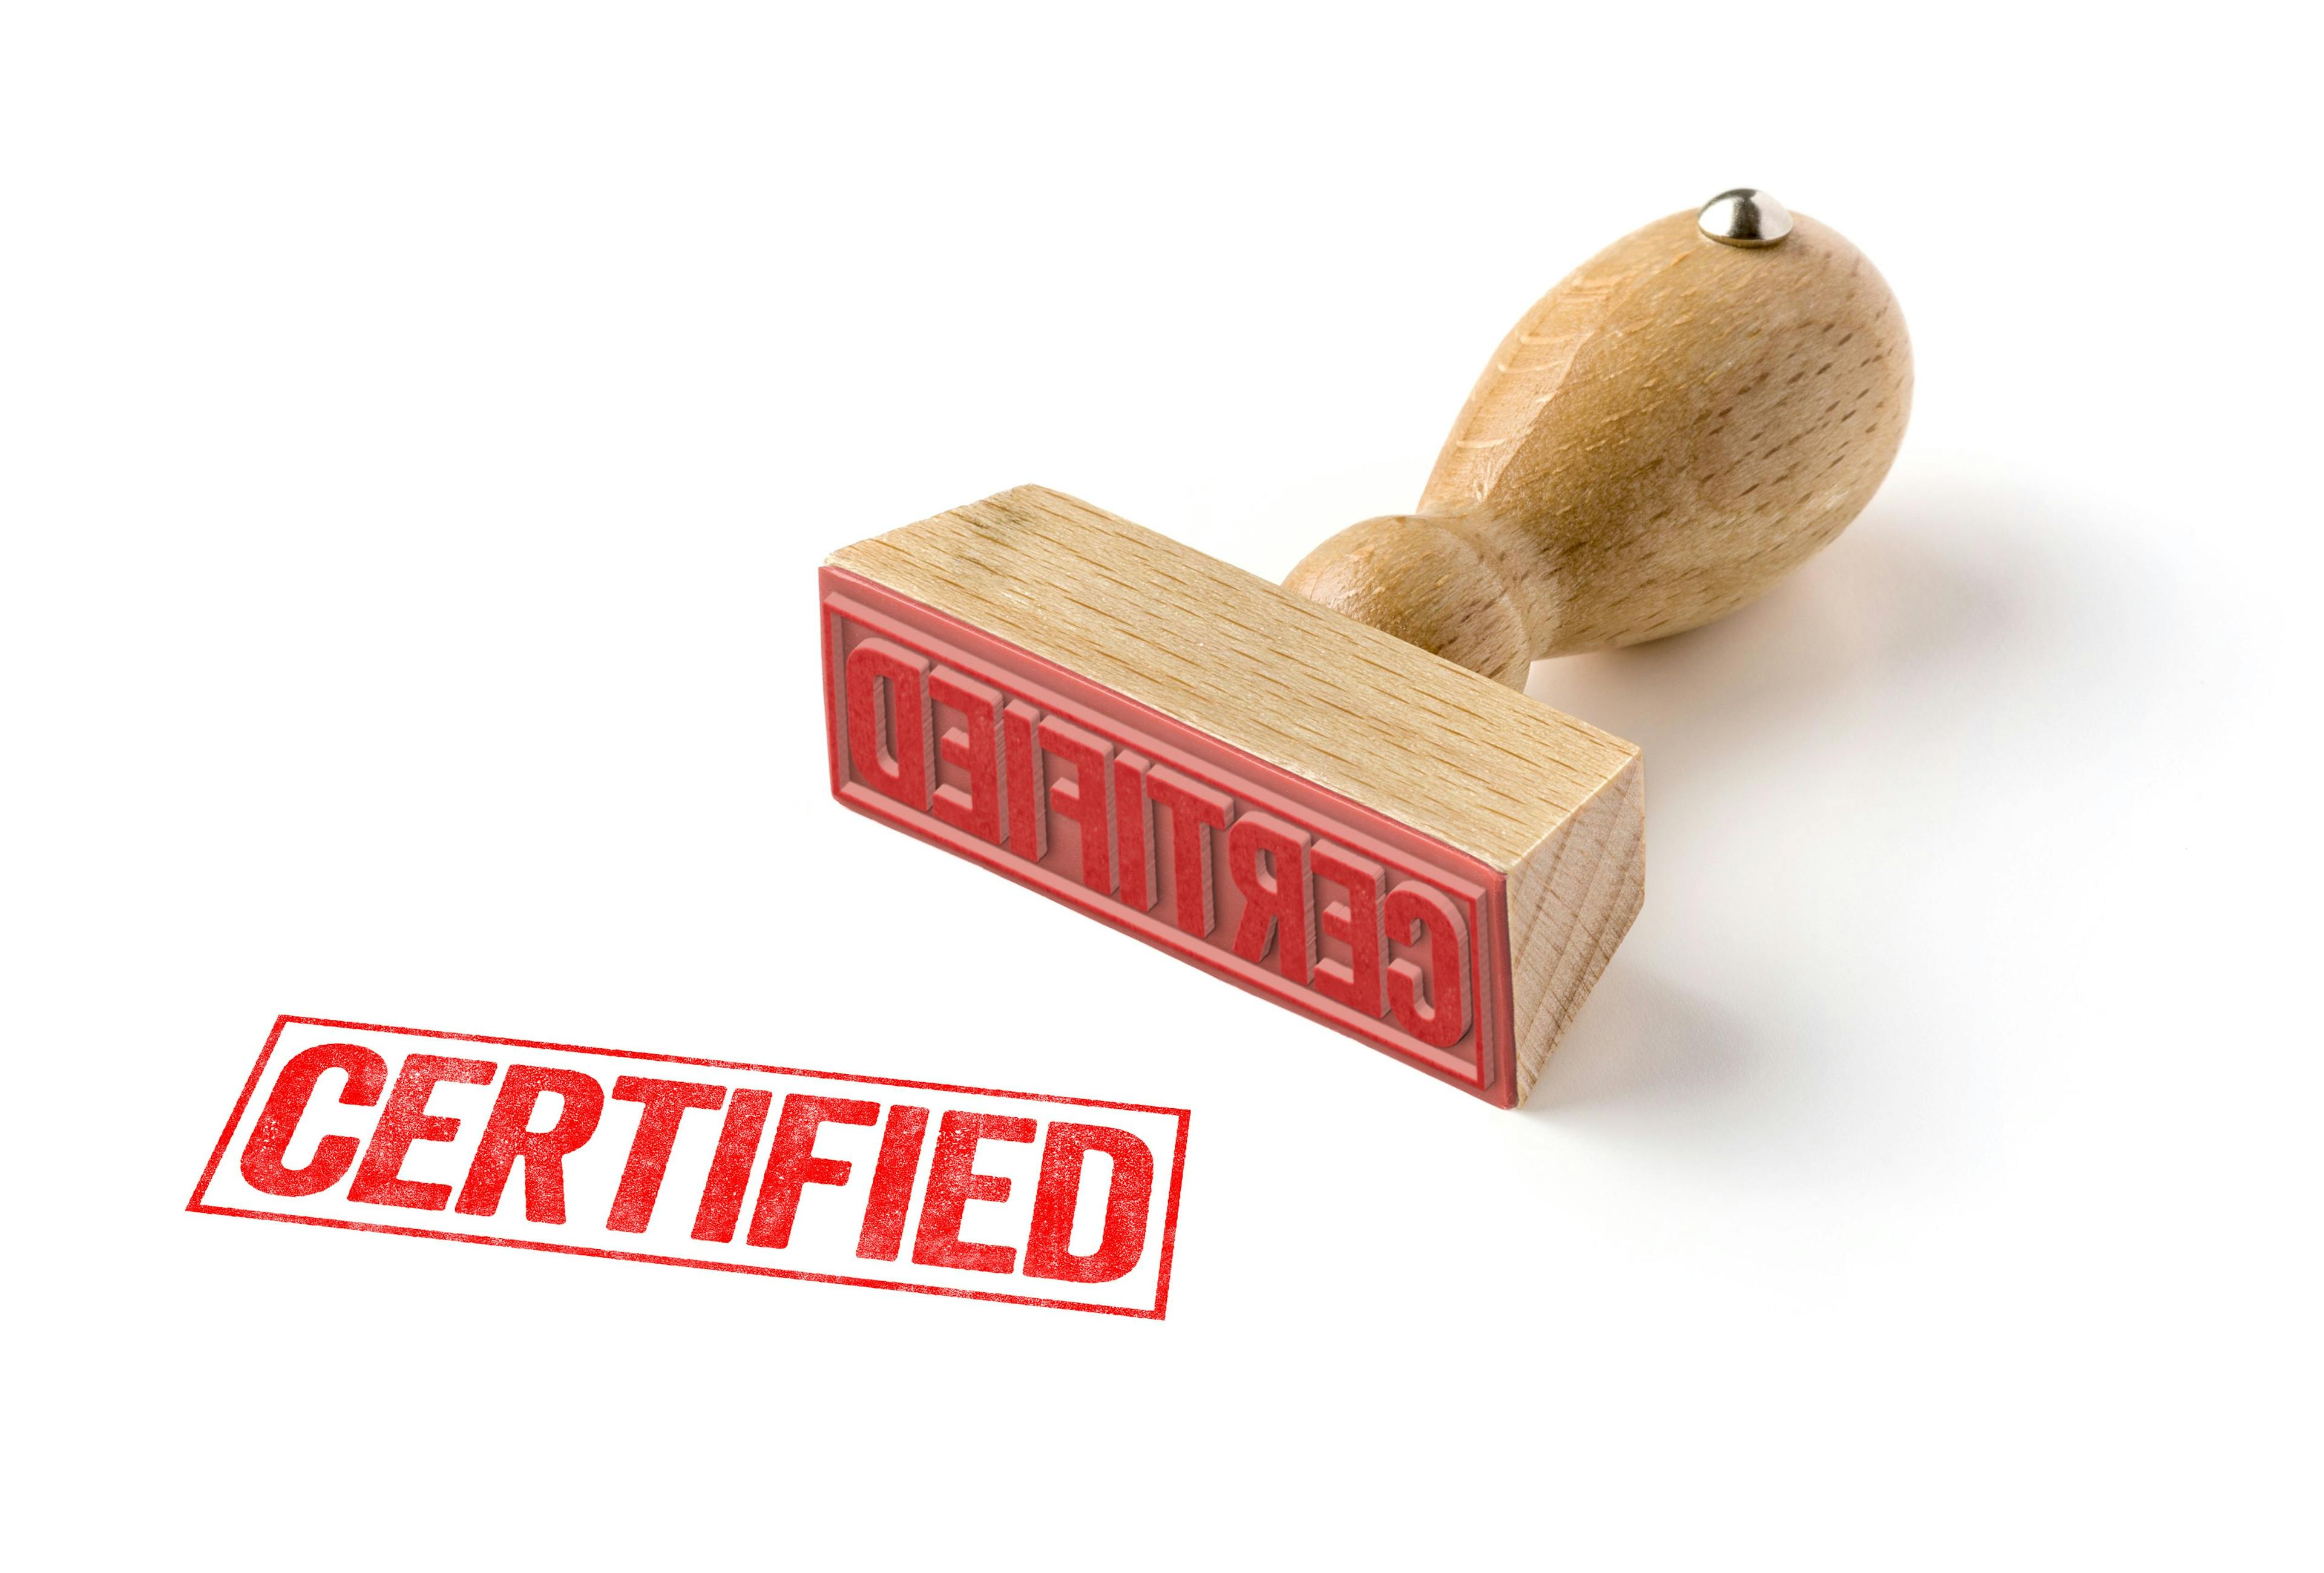 Does board certification really matter?